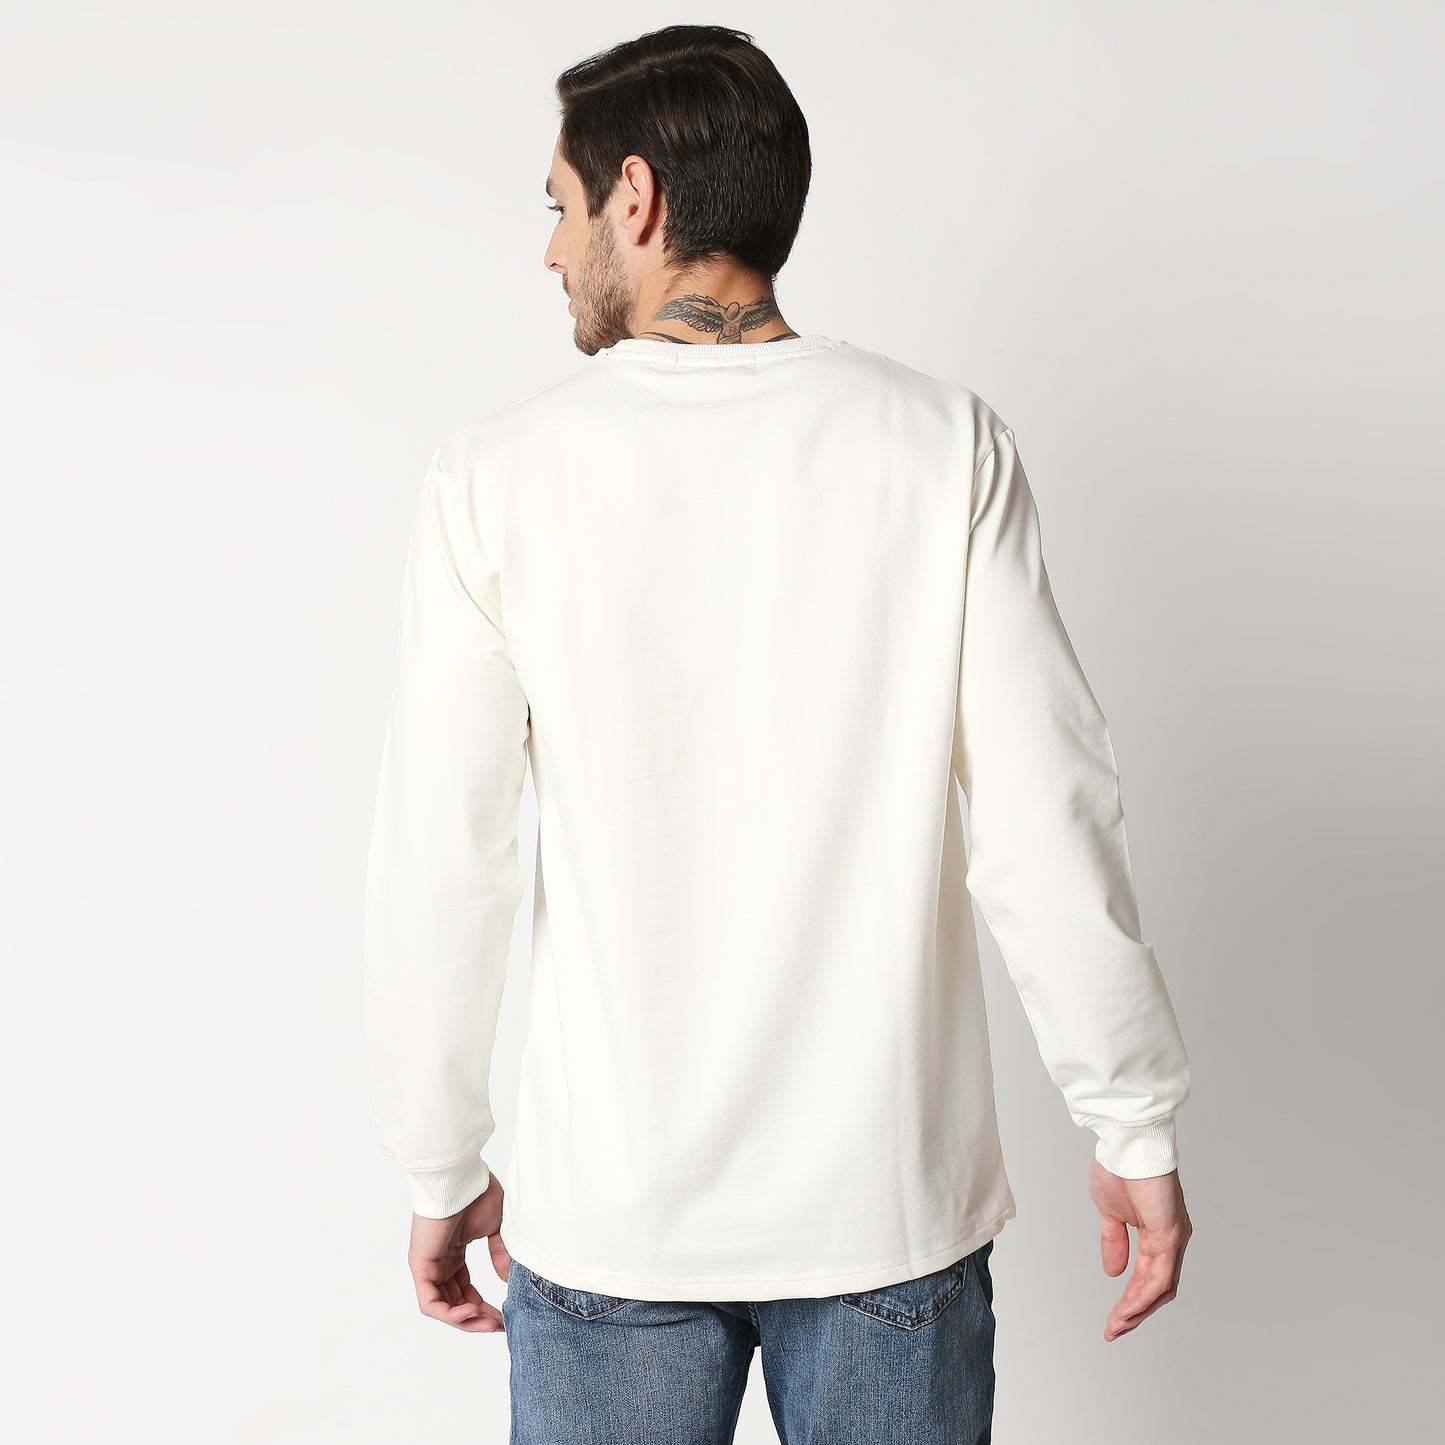 Fostino White Pullover Full Sleeves T-Shirt with Pocket - Fostino - T-Shirts